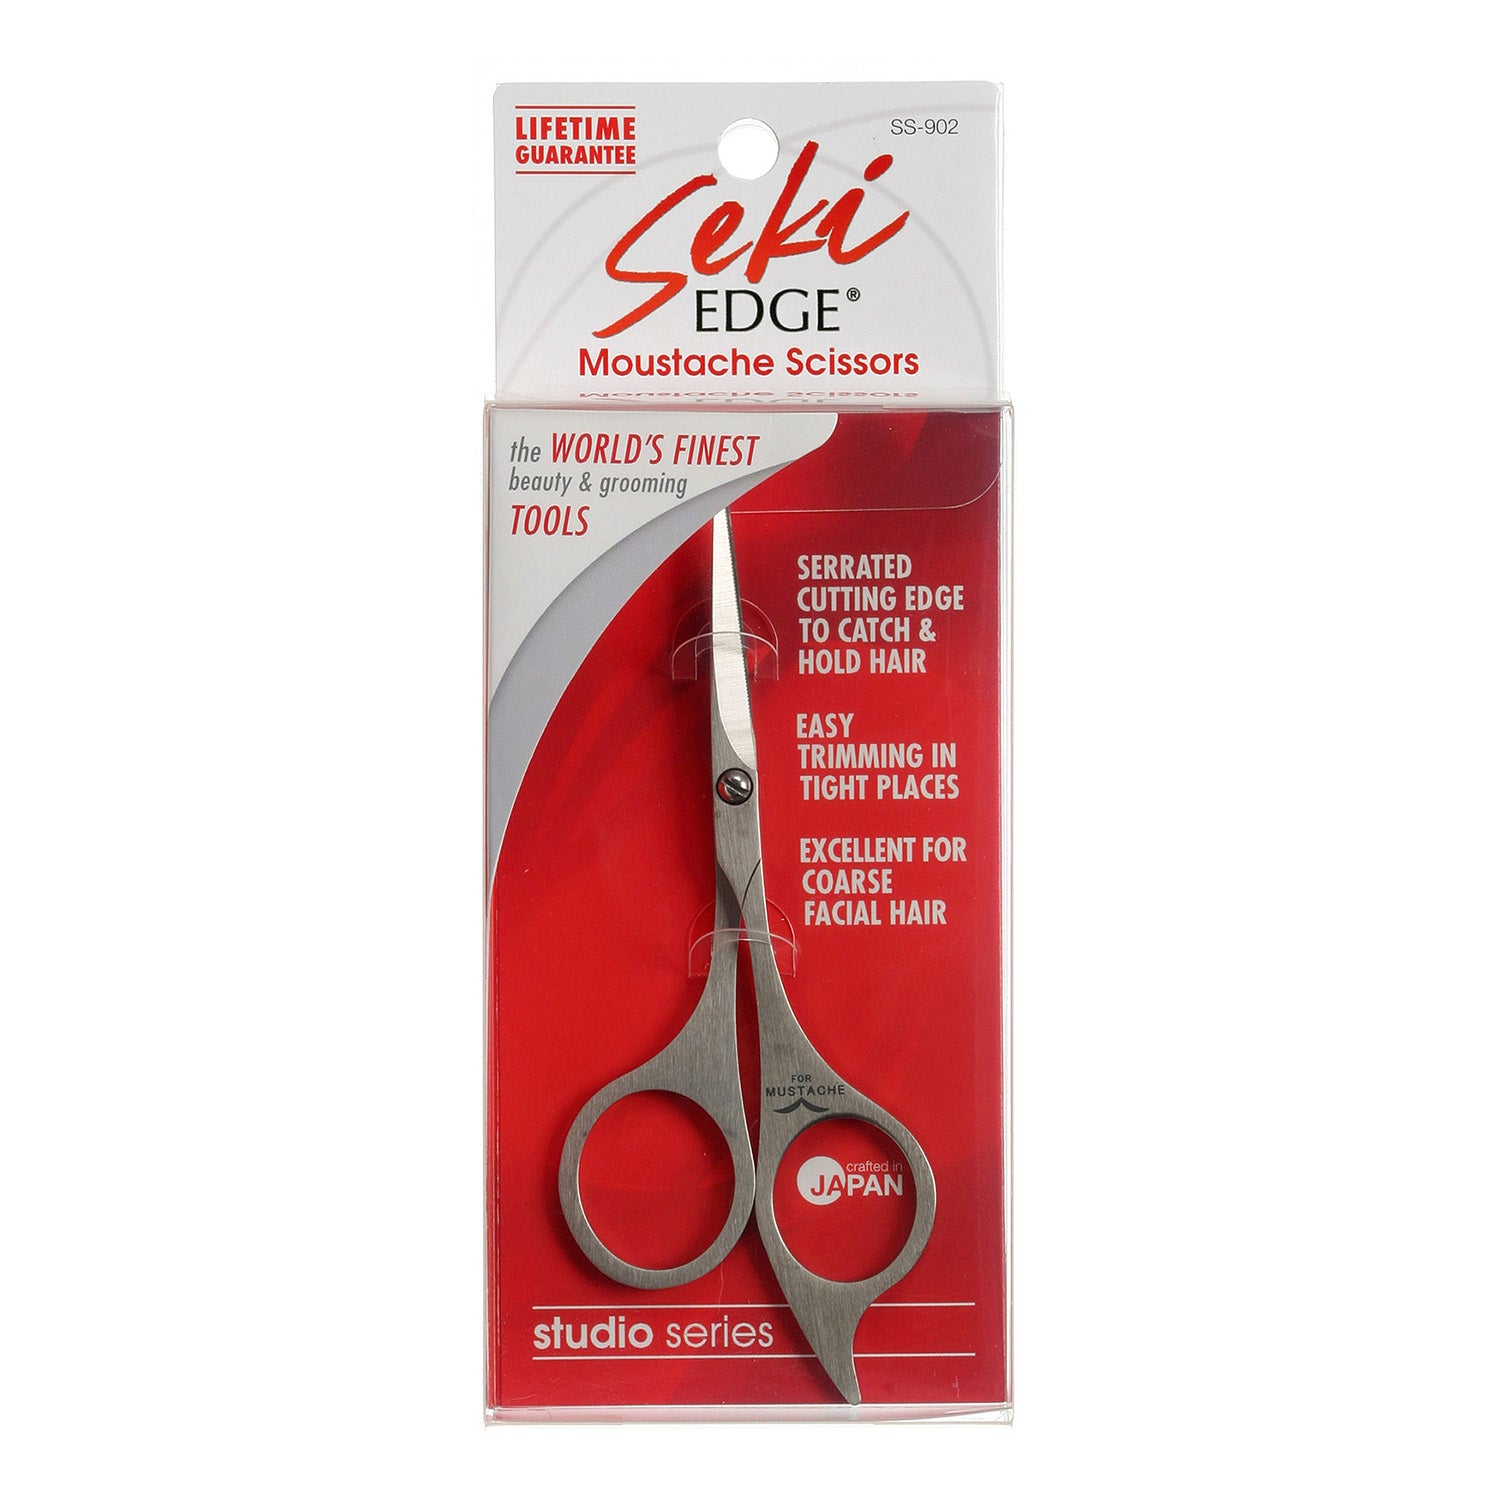 Serrated cutting edge to catch and hold hair. easy trimming in tight places, excellent for coarse facial hair. 